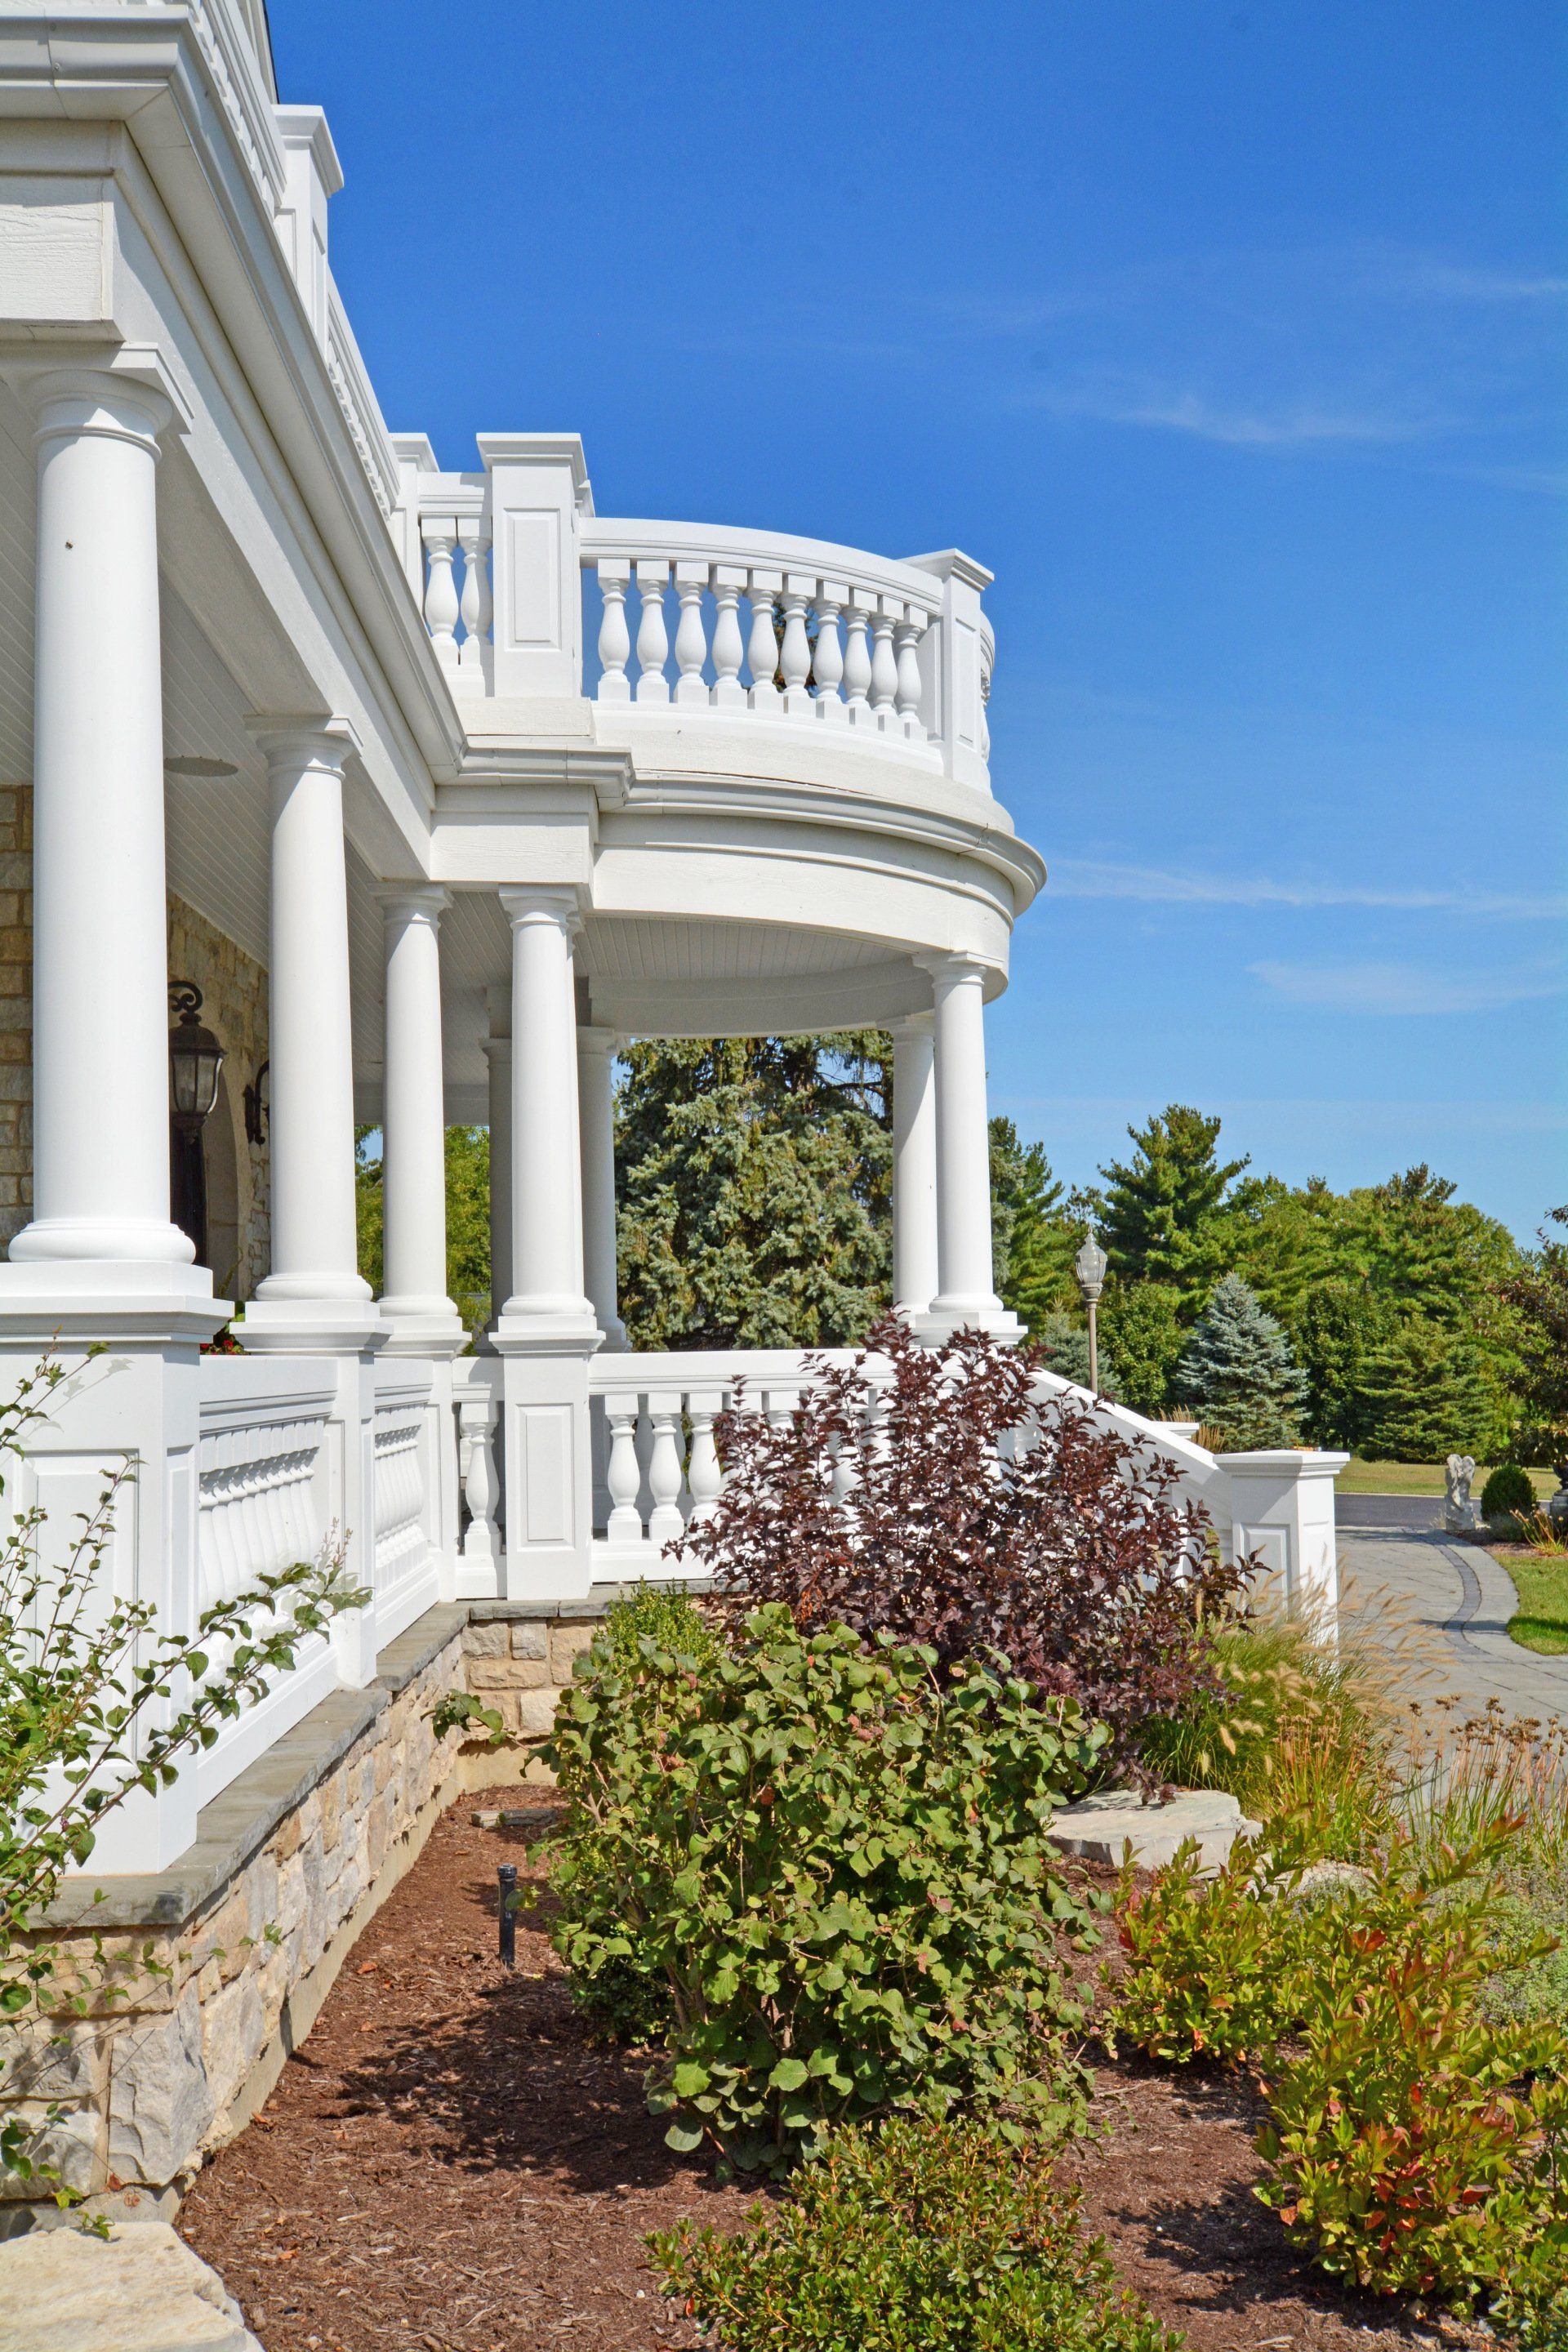 a large white house with a balcony and columns